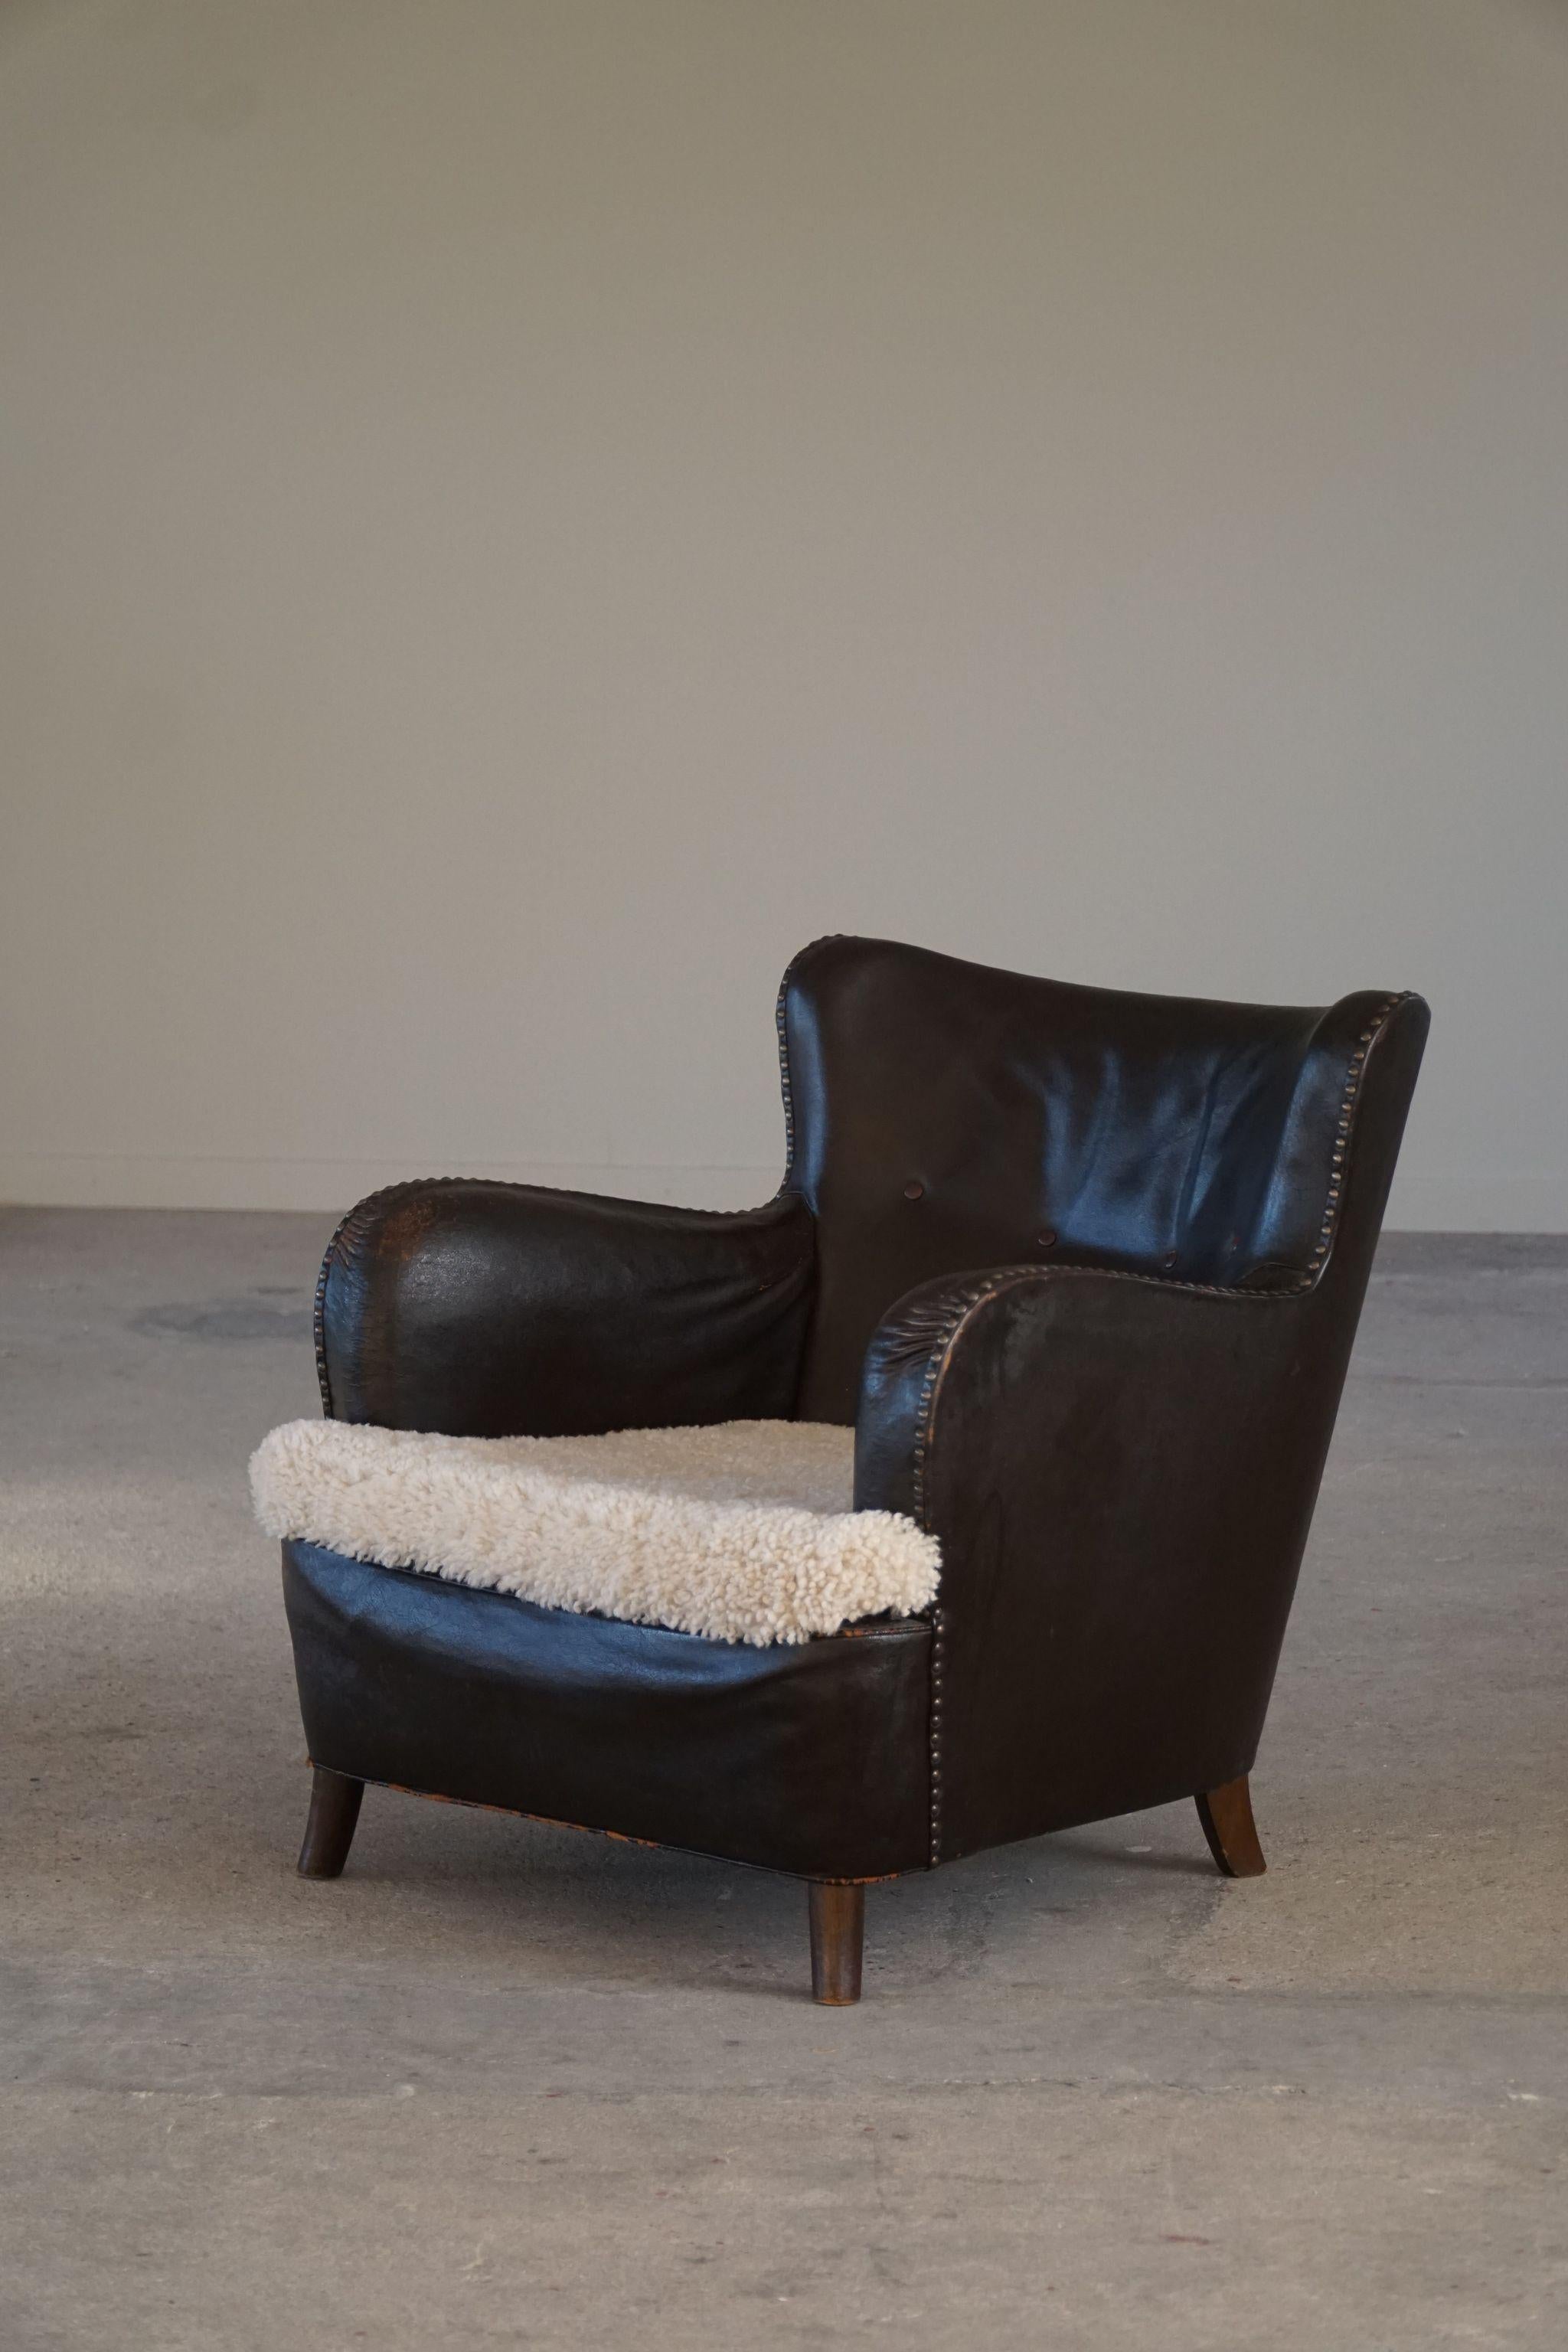 Danish Modern Easy Chair in Leather & Lambswool, Fritz Hansen, Made in 1930s For Sale 7